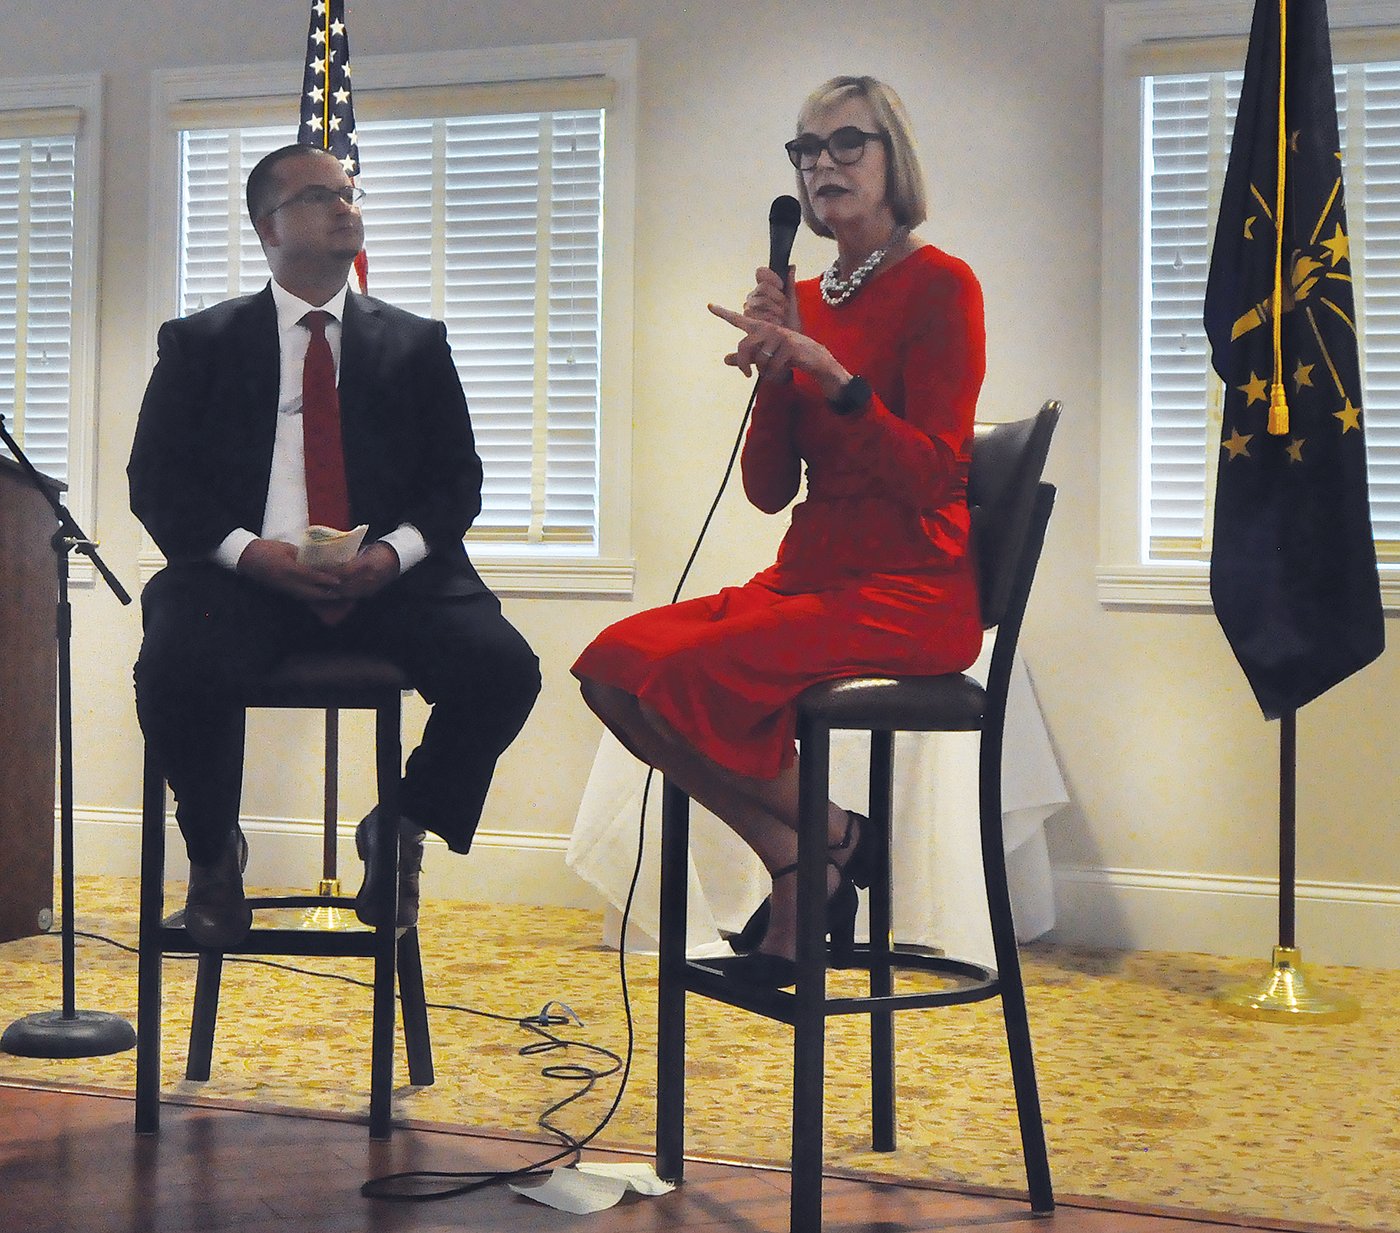 Lieutenant Governor Susan Crouch, right, speaks Tuesday to members of the Montgomery County Republican Party during the group’s annual dinner at the Crawfordsville Country Club. As part of her keynote address, Crouch participated in a question and answer session with Jim Johnson, left, the Montgomery County Republican Party chairman.